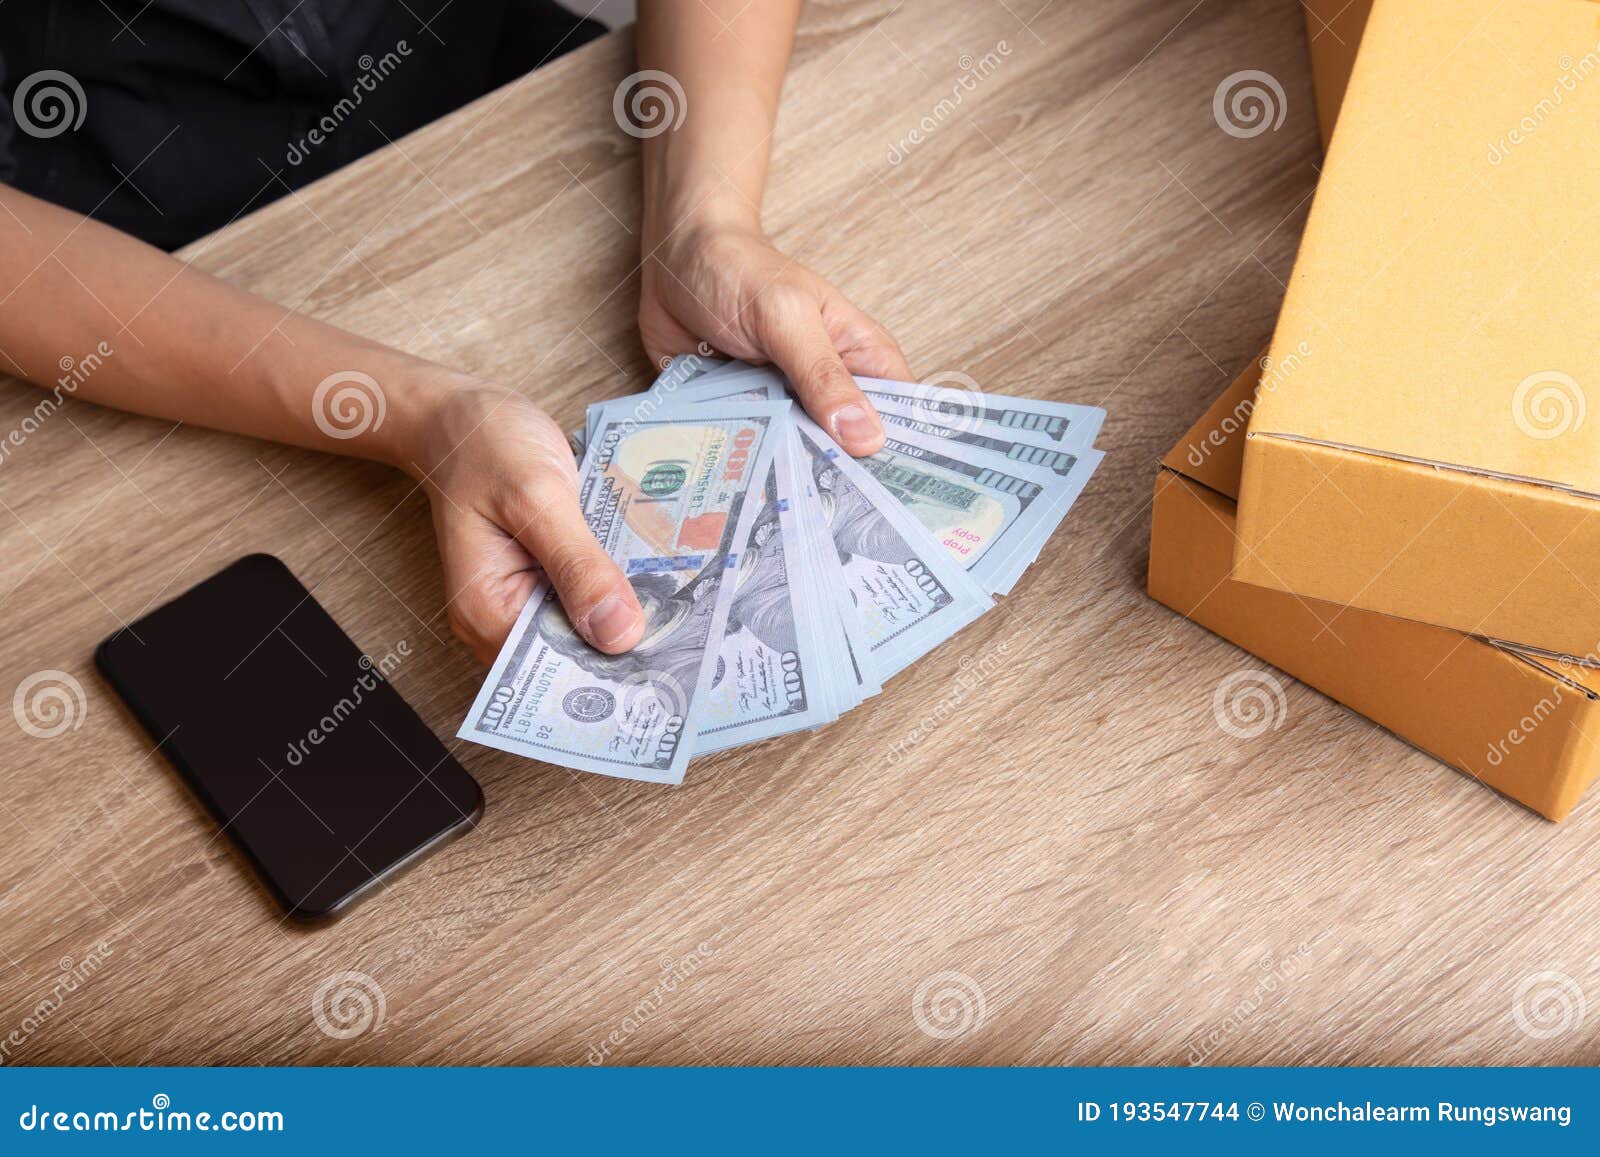 Download 9 823 Money Mockup Photos Free Royalty Free Stock Photos From Dreamstime